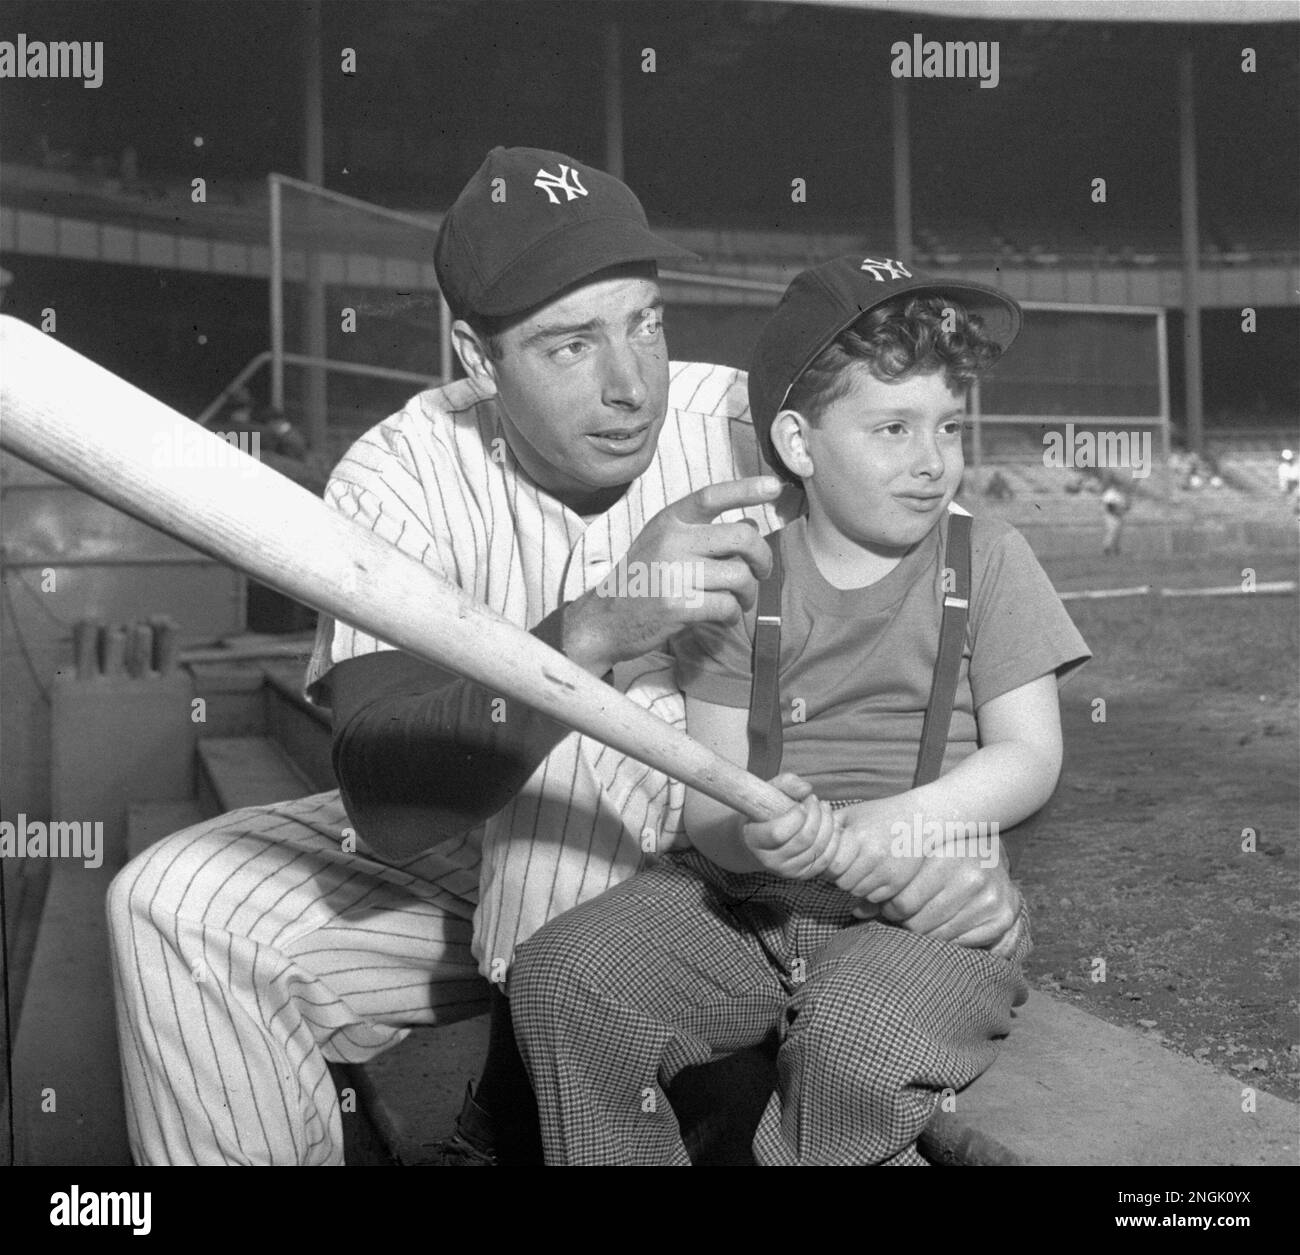 Joe DiMaggio, star Yankee outfielder, passes on a few batting tips to his  five-and-a-half-year old son, Joseph III, prior to the Yankees --  Washington Senators game at Yankee Stadium, New York, April